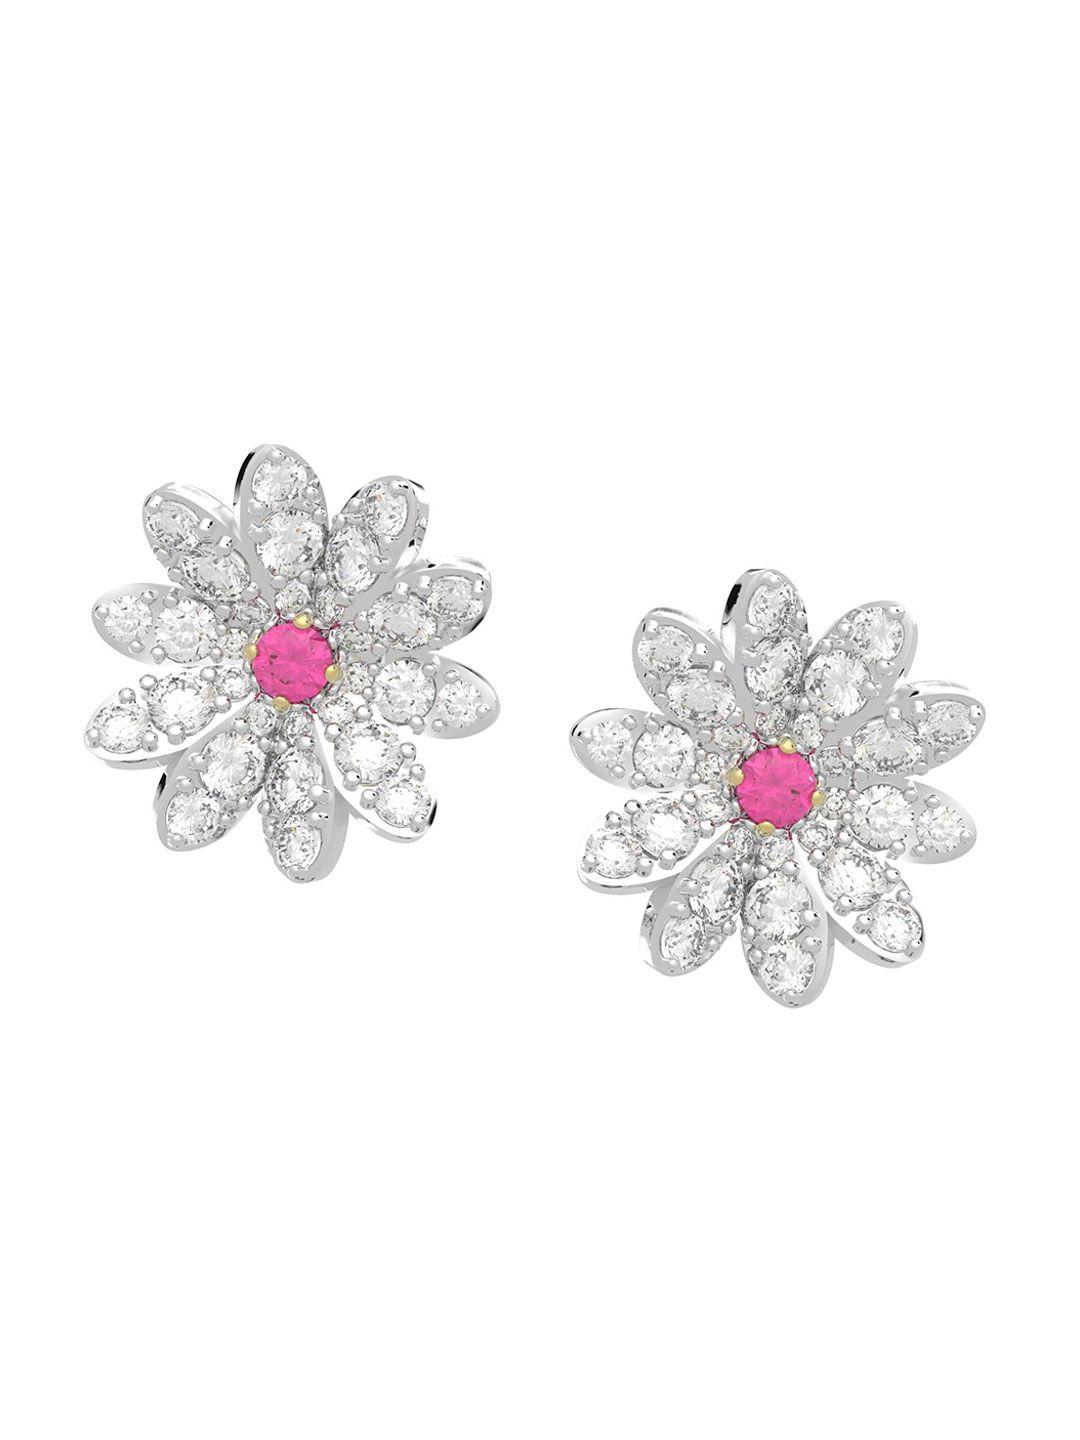 swarovski silver-plated pink & white floral crystals studs earrings